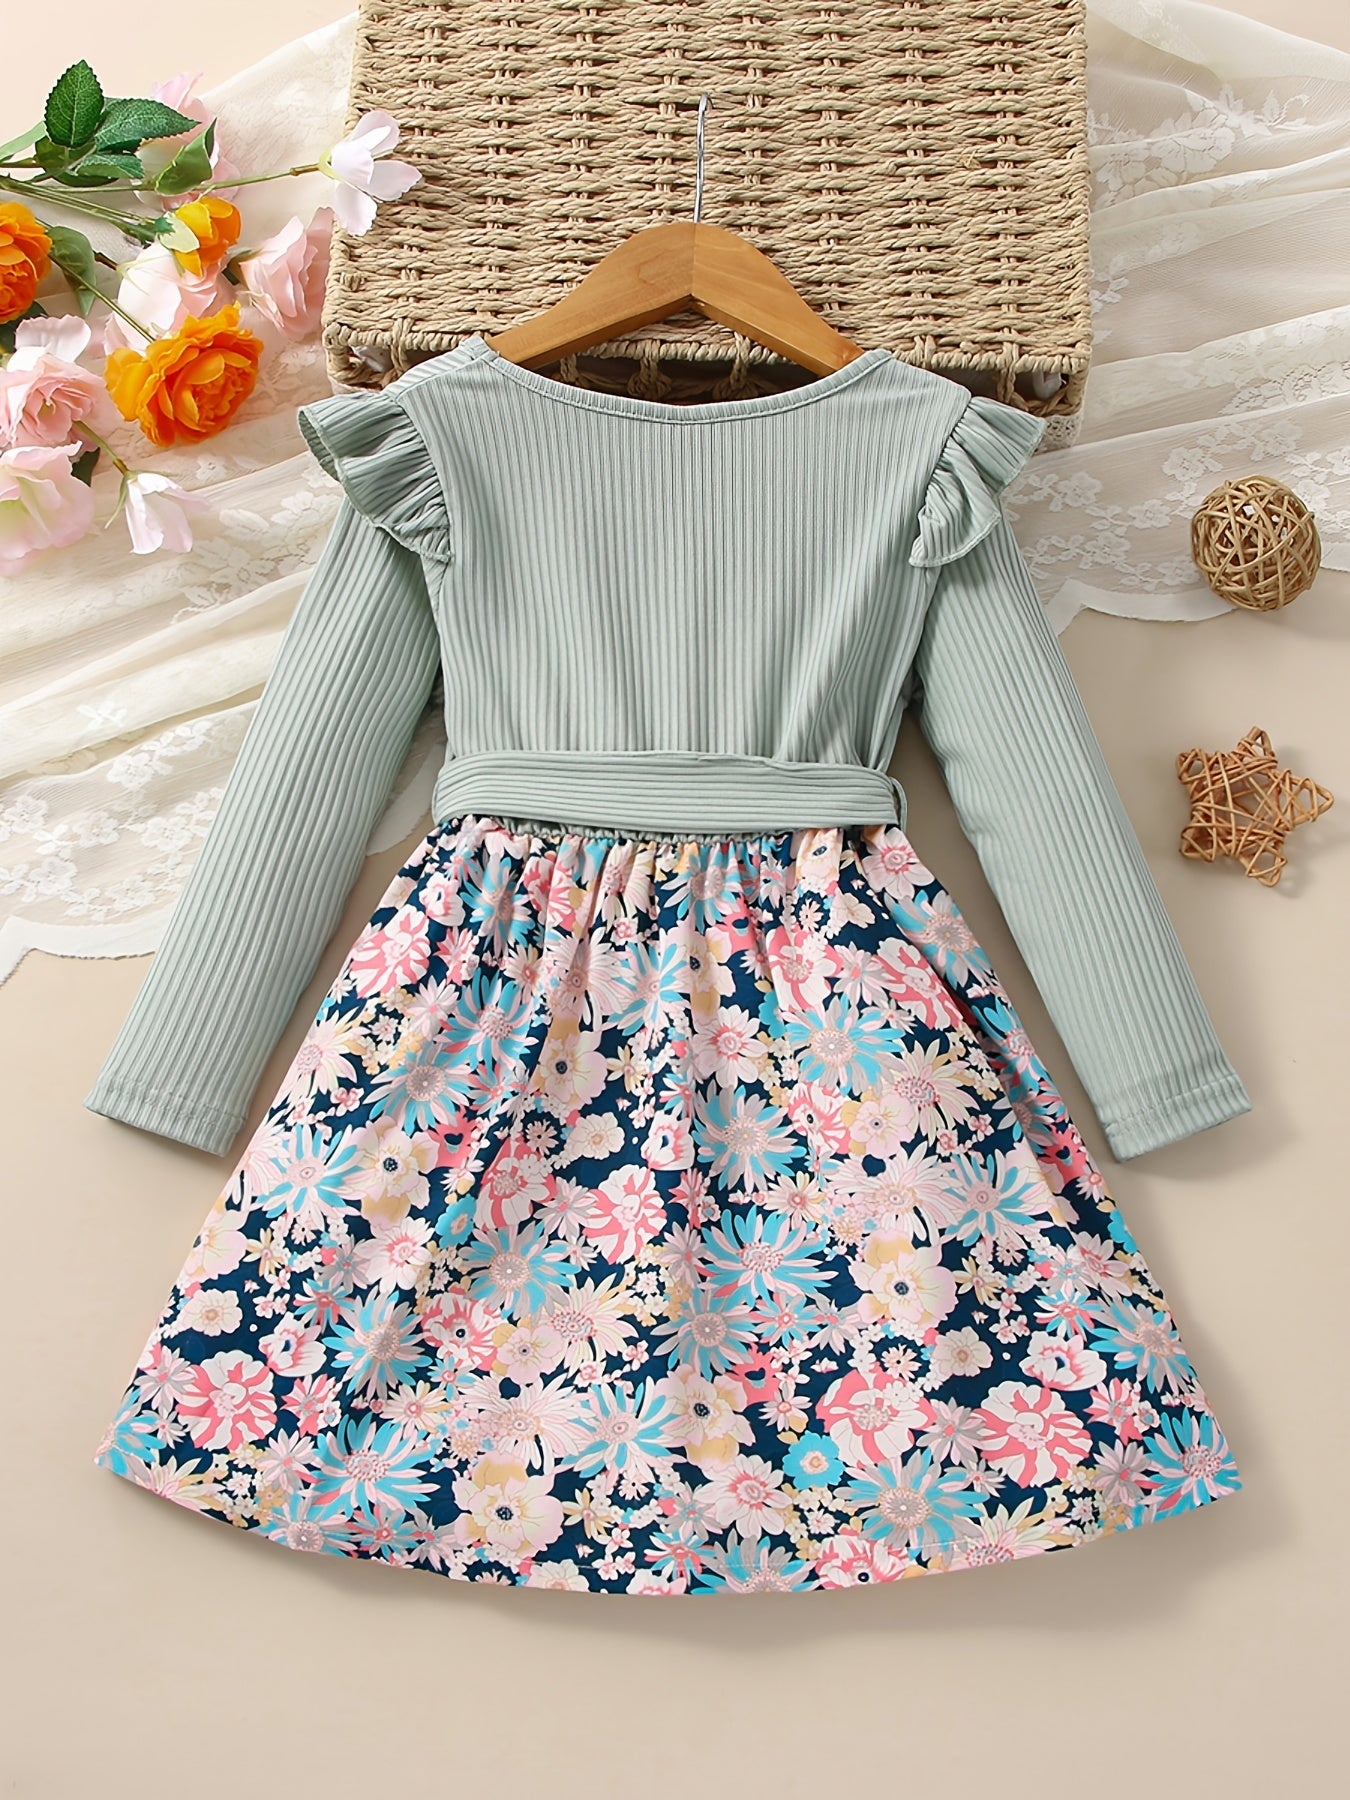 Girls Ruffle Button Flowers Print Splicing Dress - A Chic and Adorable Outfit